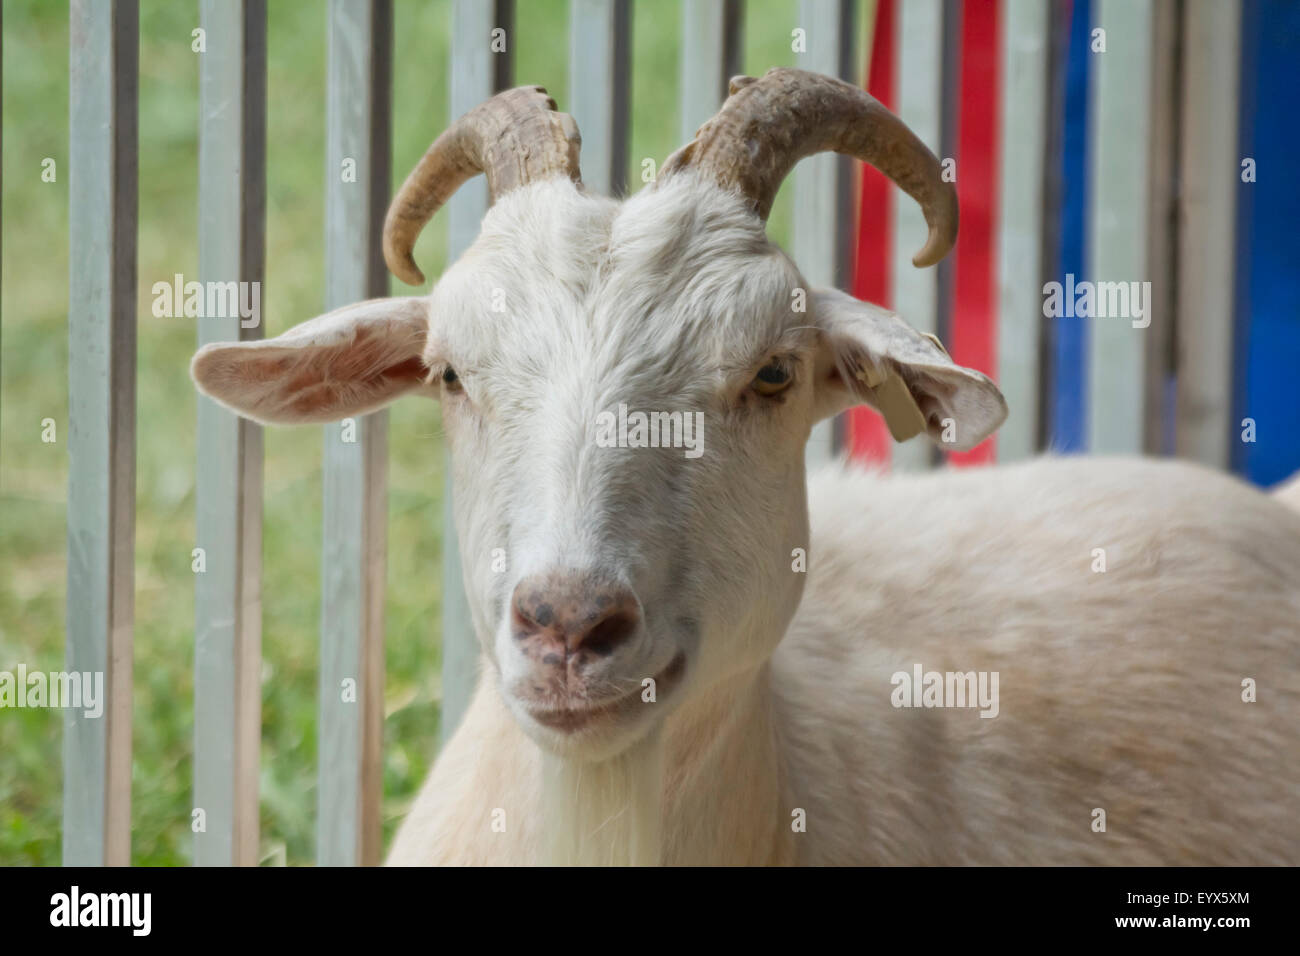 Smirking adult goat with horns in pen behind fence Stock Photo